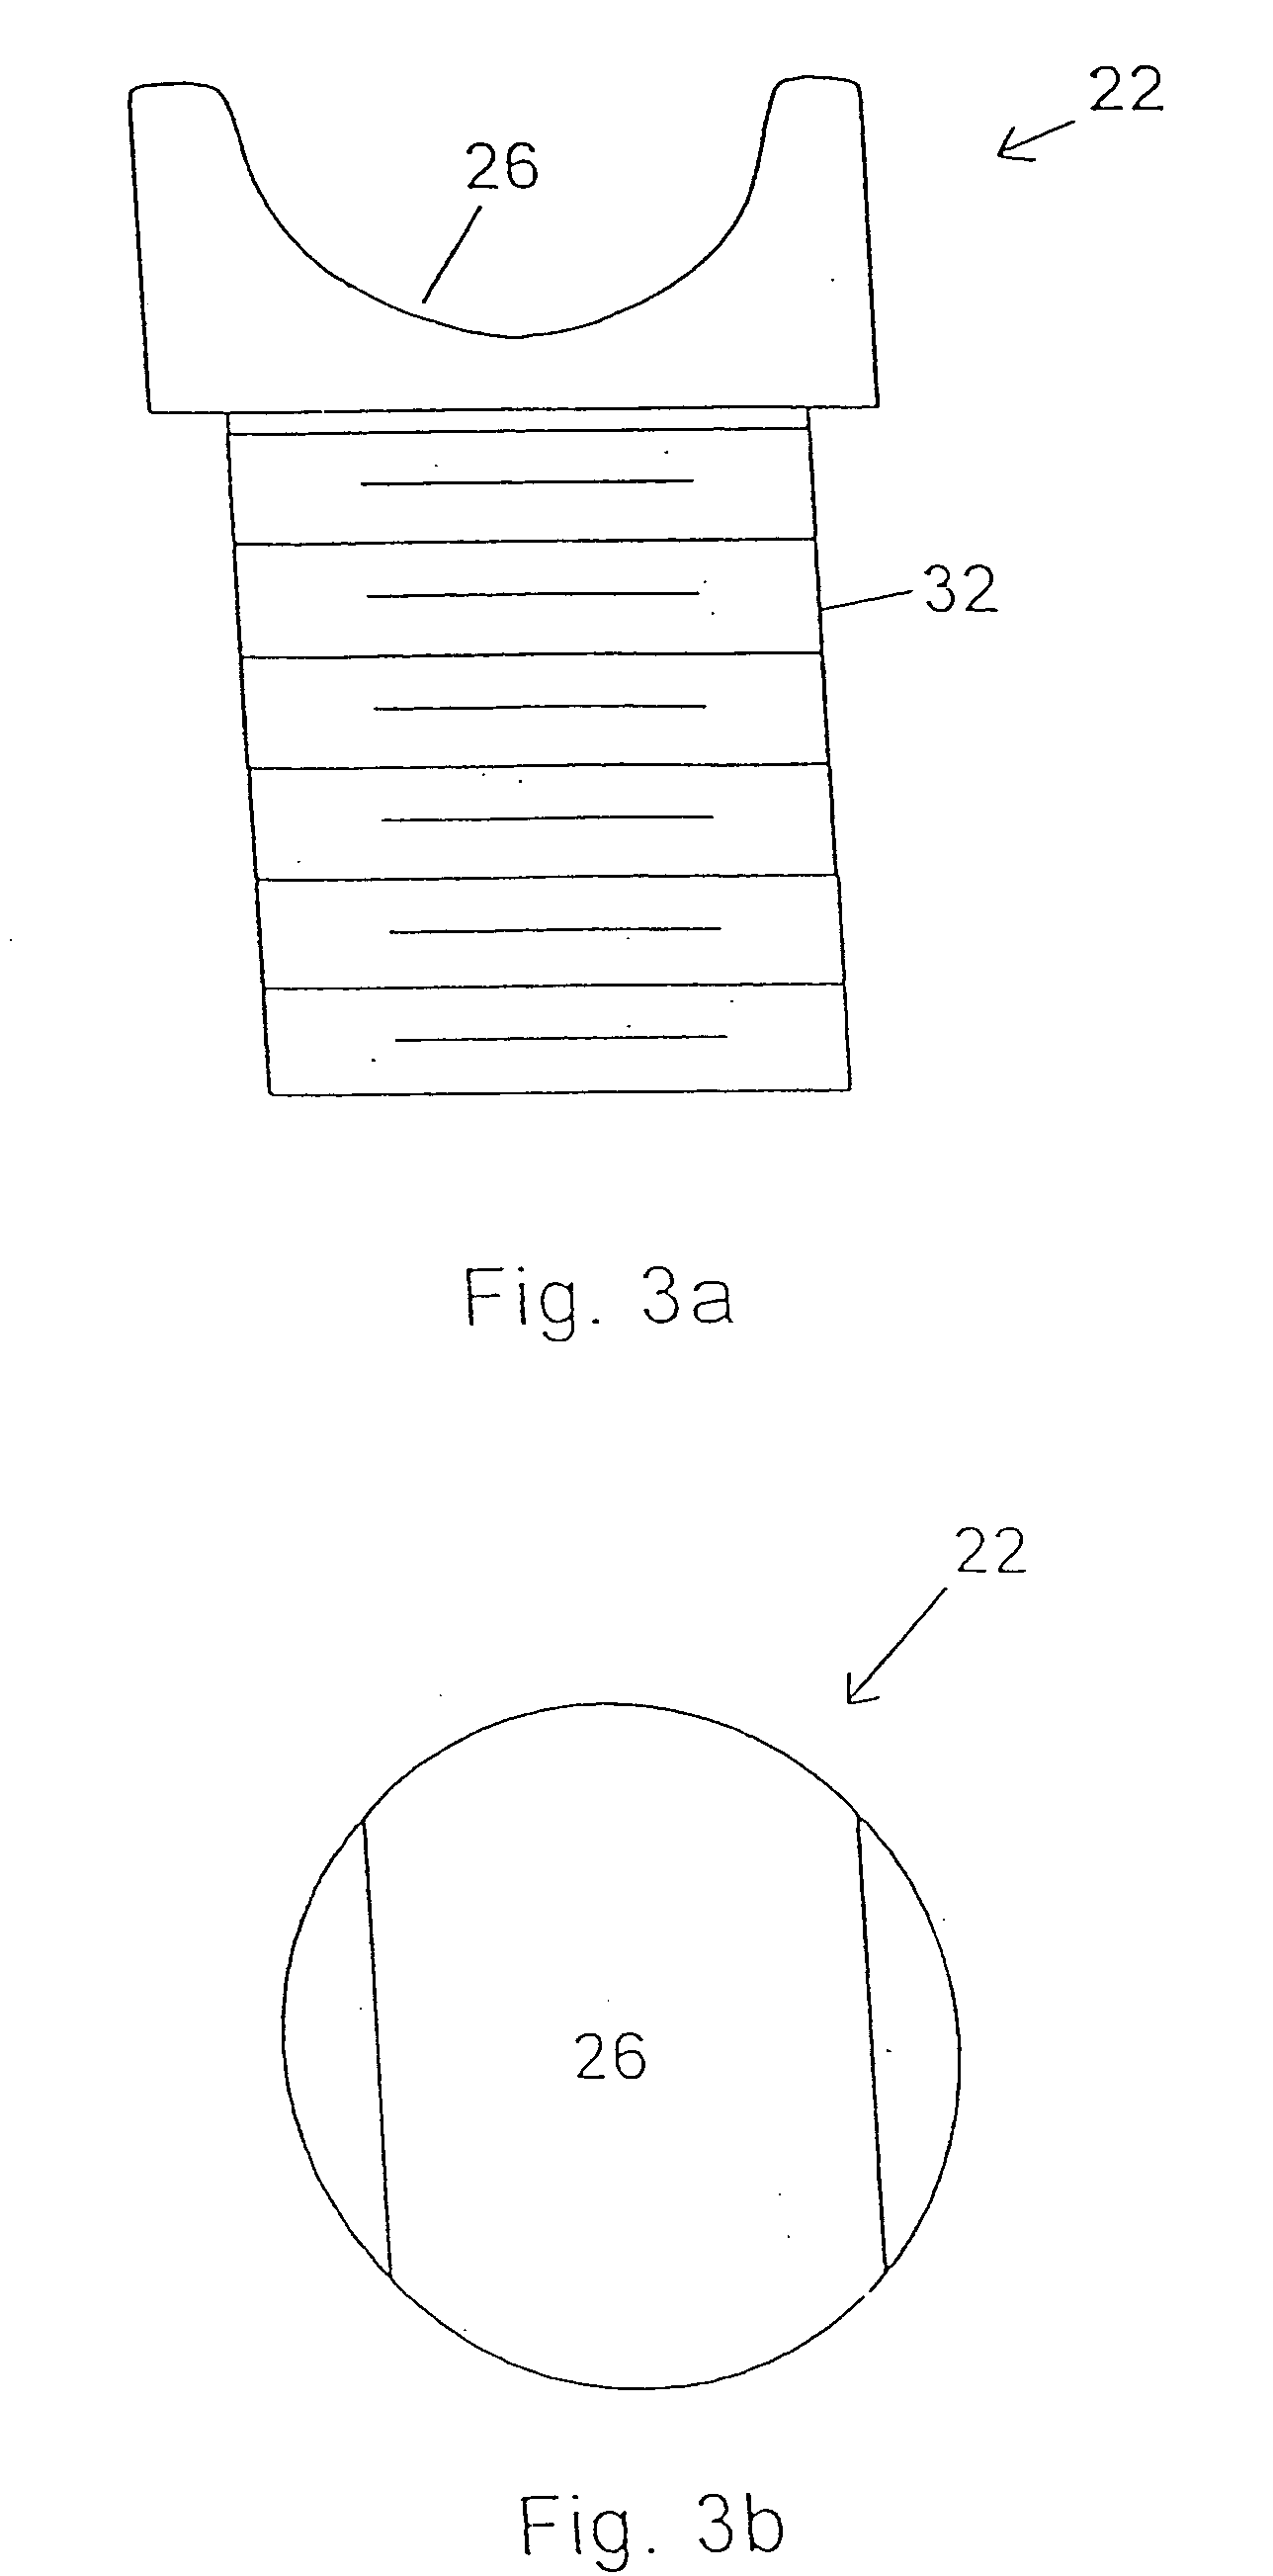 Supplemental spine fixation device and method